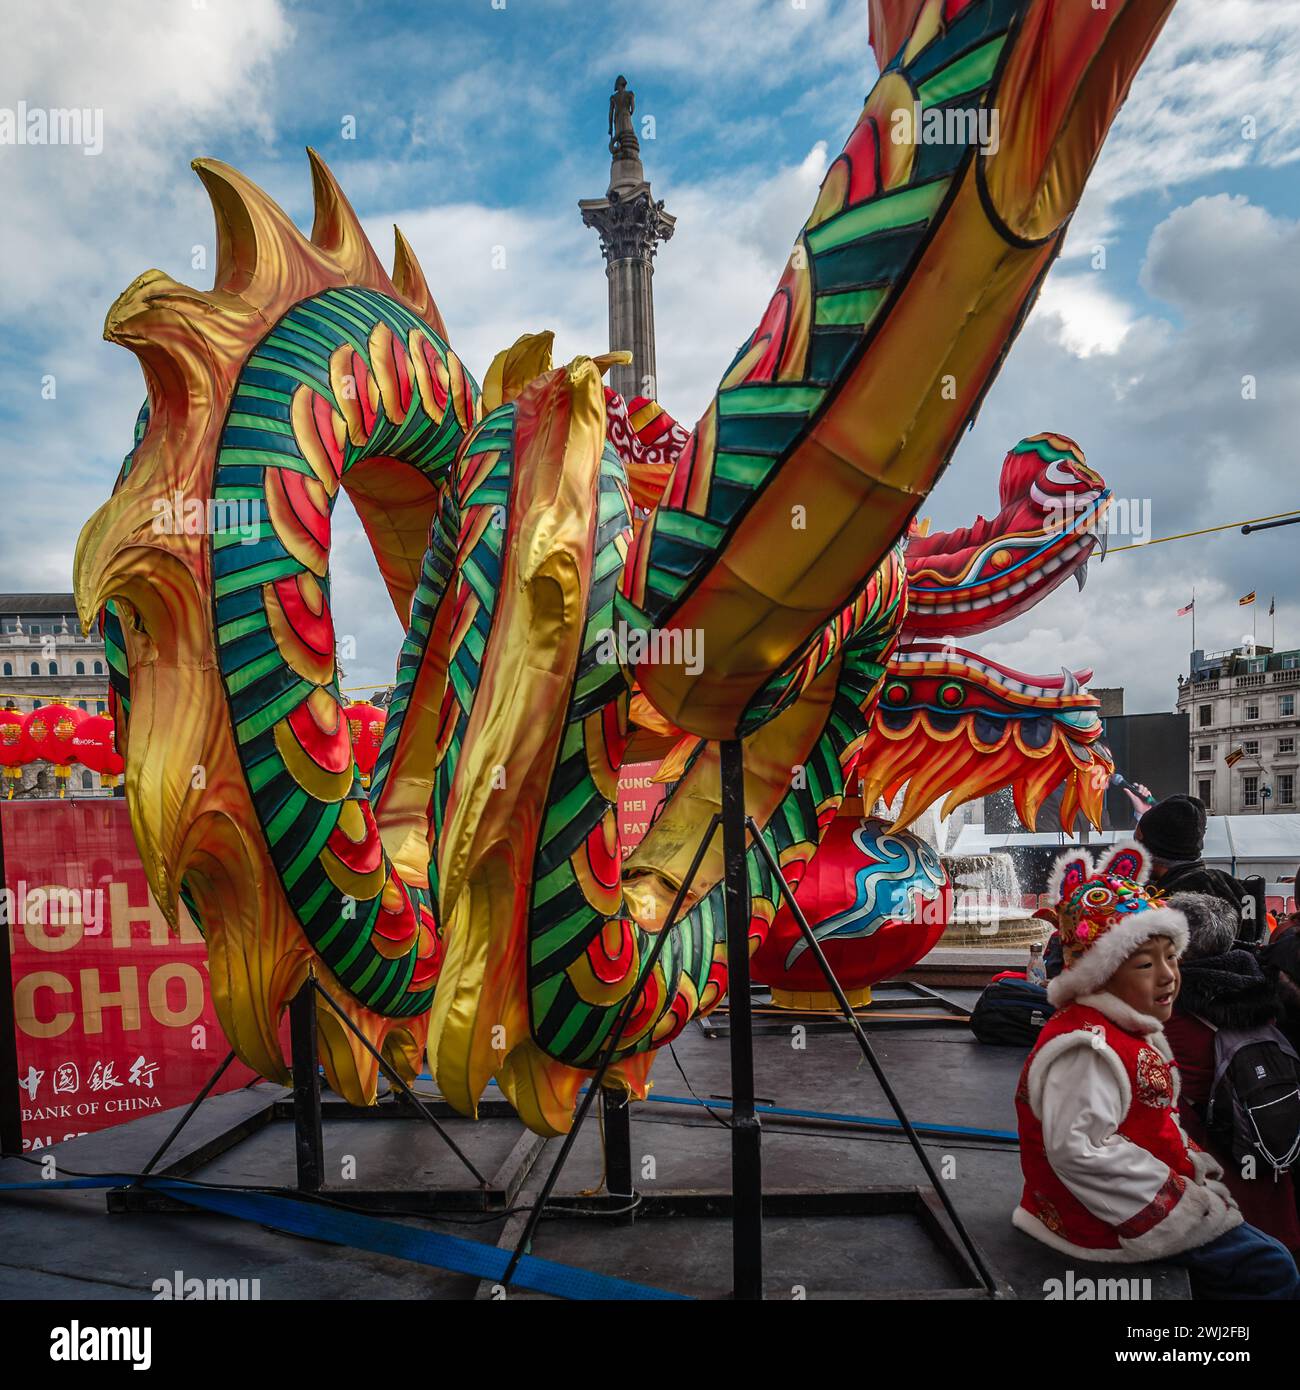 A large dragon in Trafalgar Square for the Chinese new year celebrations in London. Stock Photo